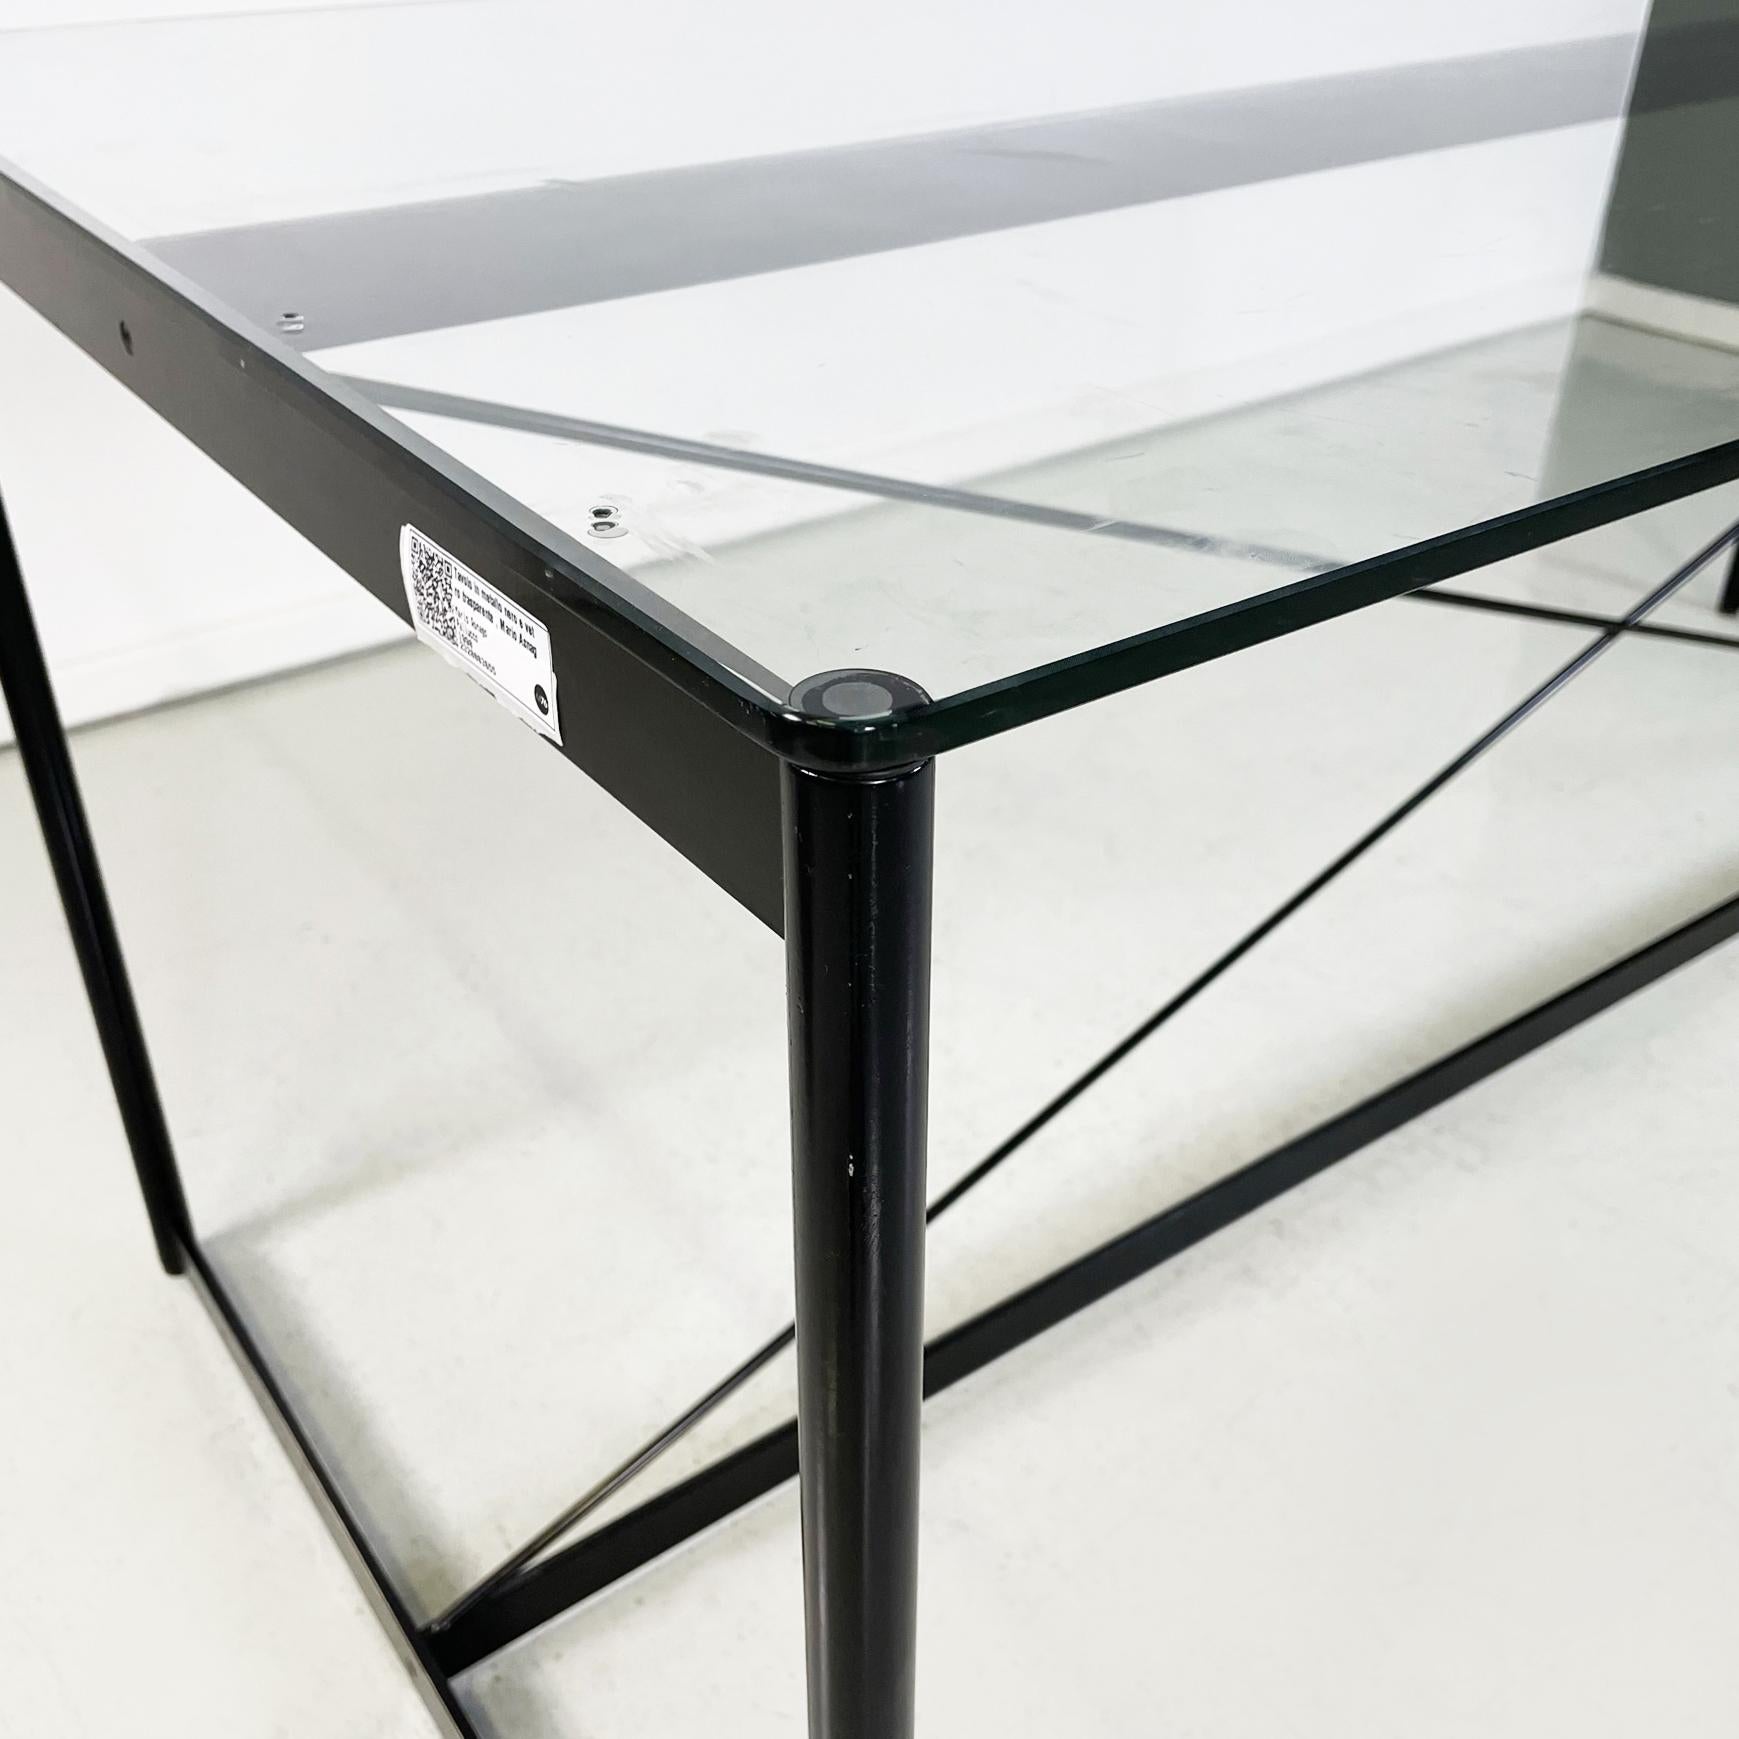 Italian Bauhaus Modern Dining Table Asnago by Mario Asnago for Pallucco, 1990s For Sale 1